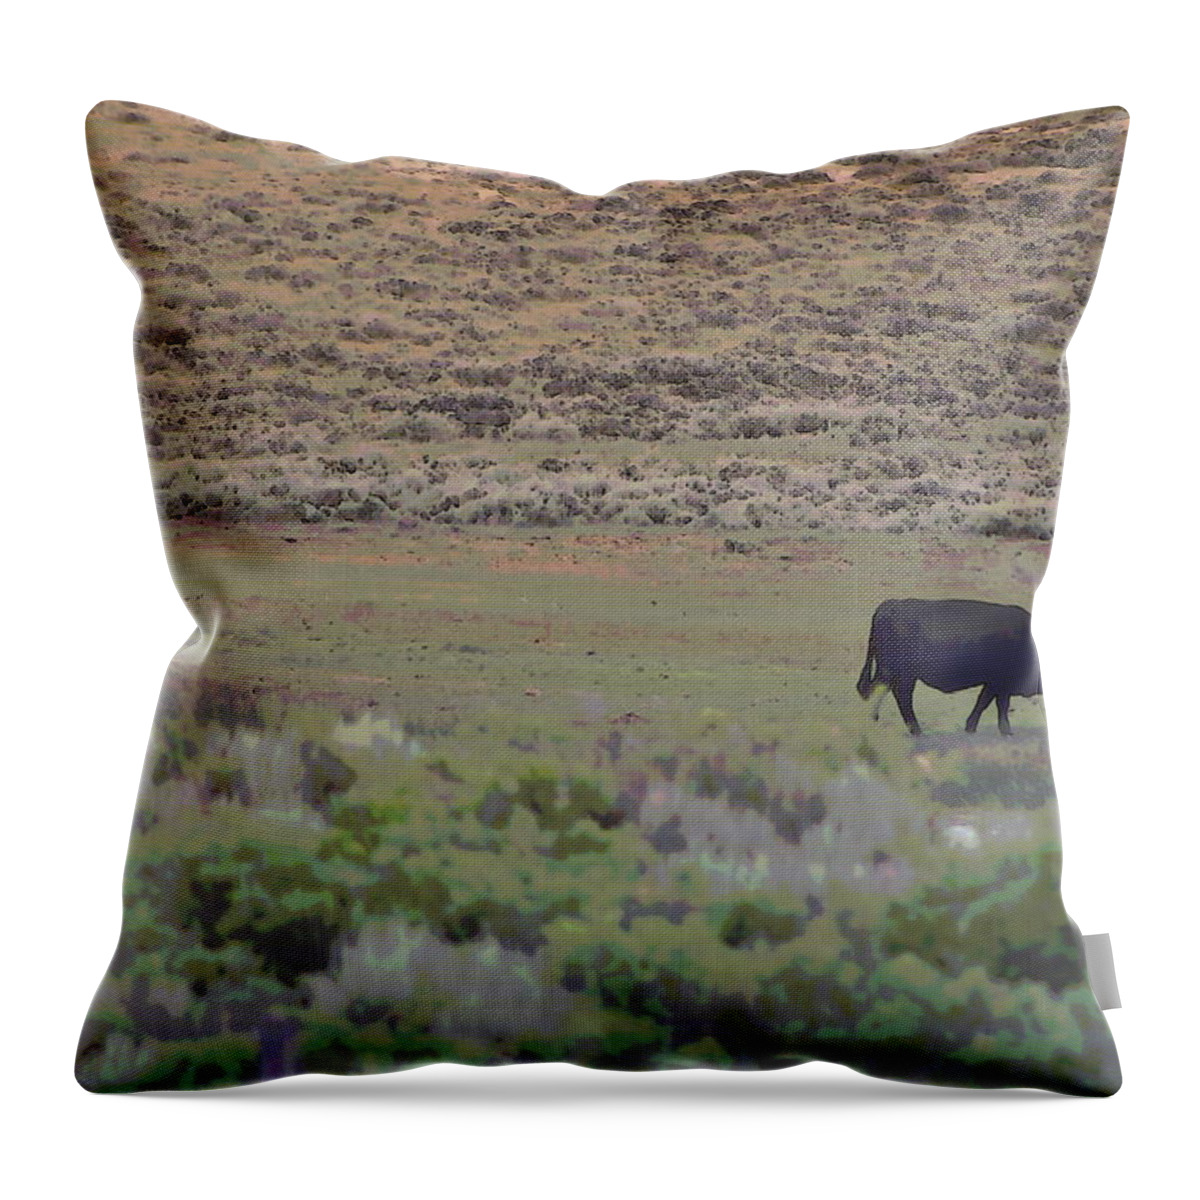 Old Fashioned Family Farm Throw Pillow featuring the photograph Nebraska Farm Life - The Farm by Colleen Cornelius